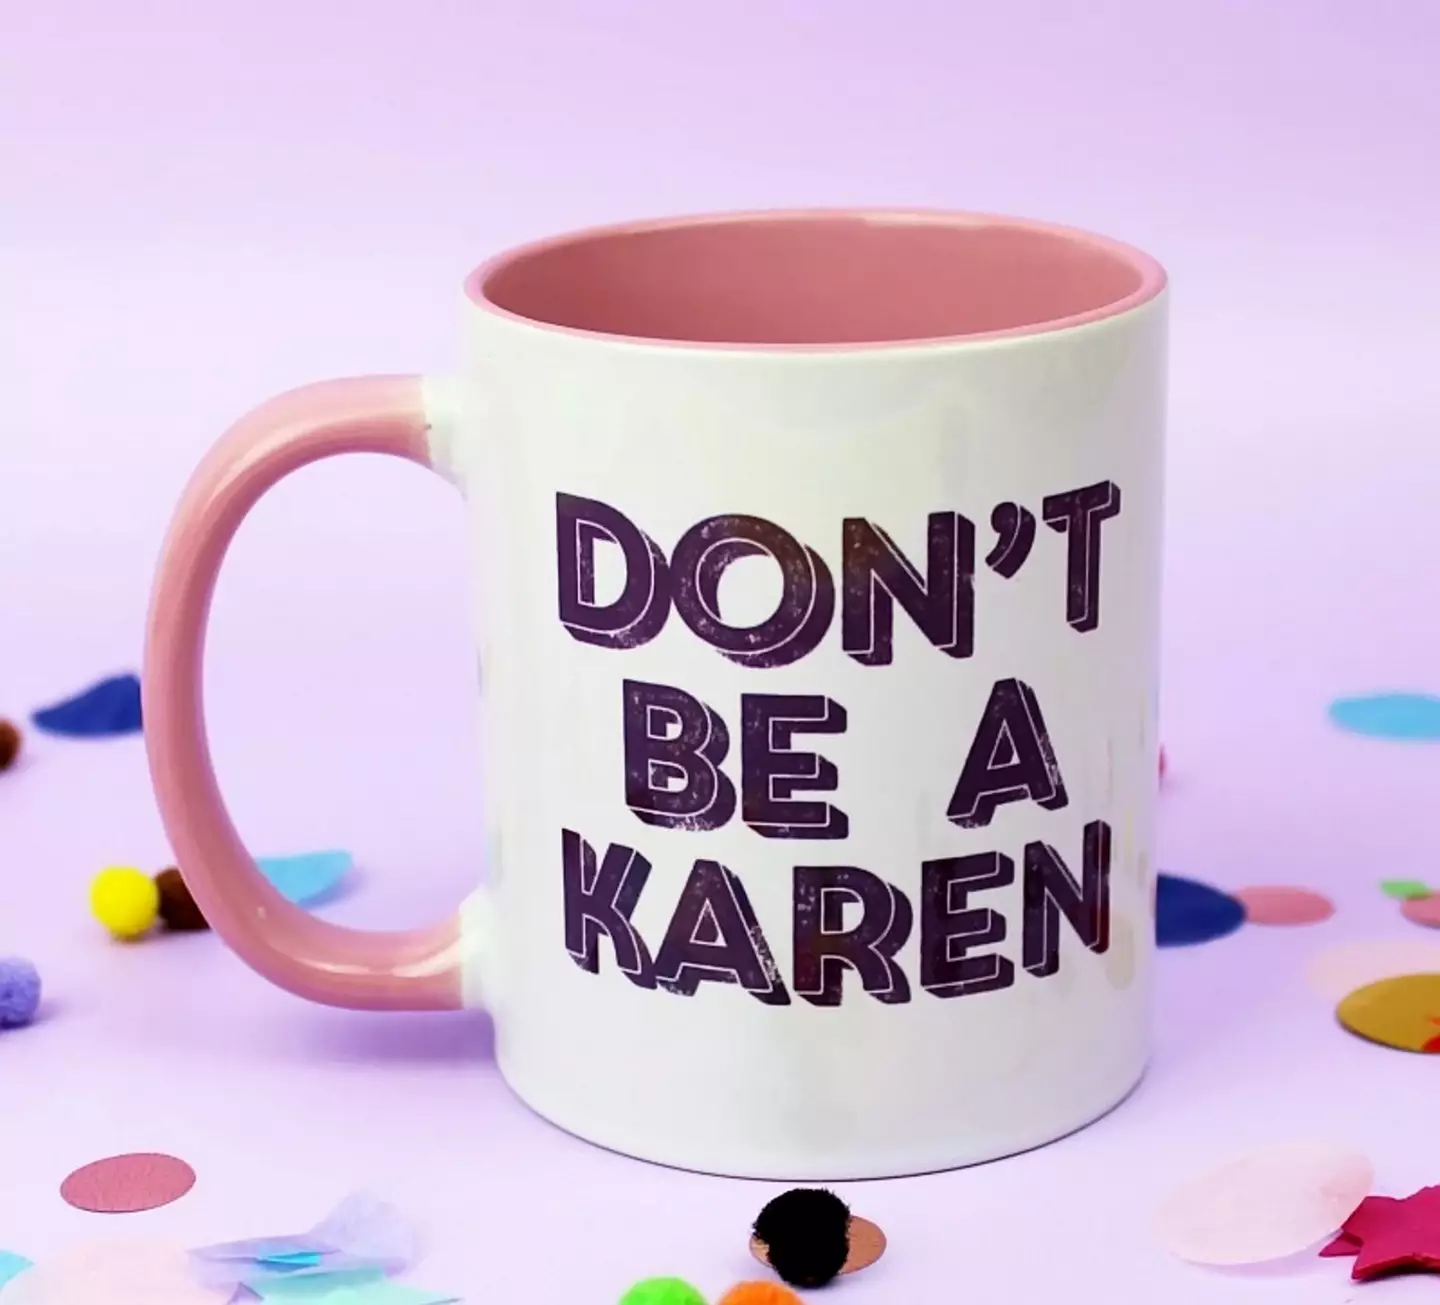 Karens are not happy with the collection (